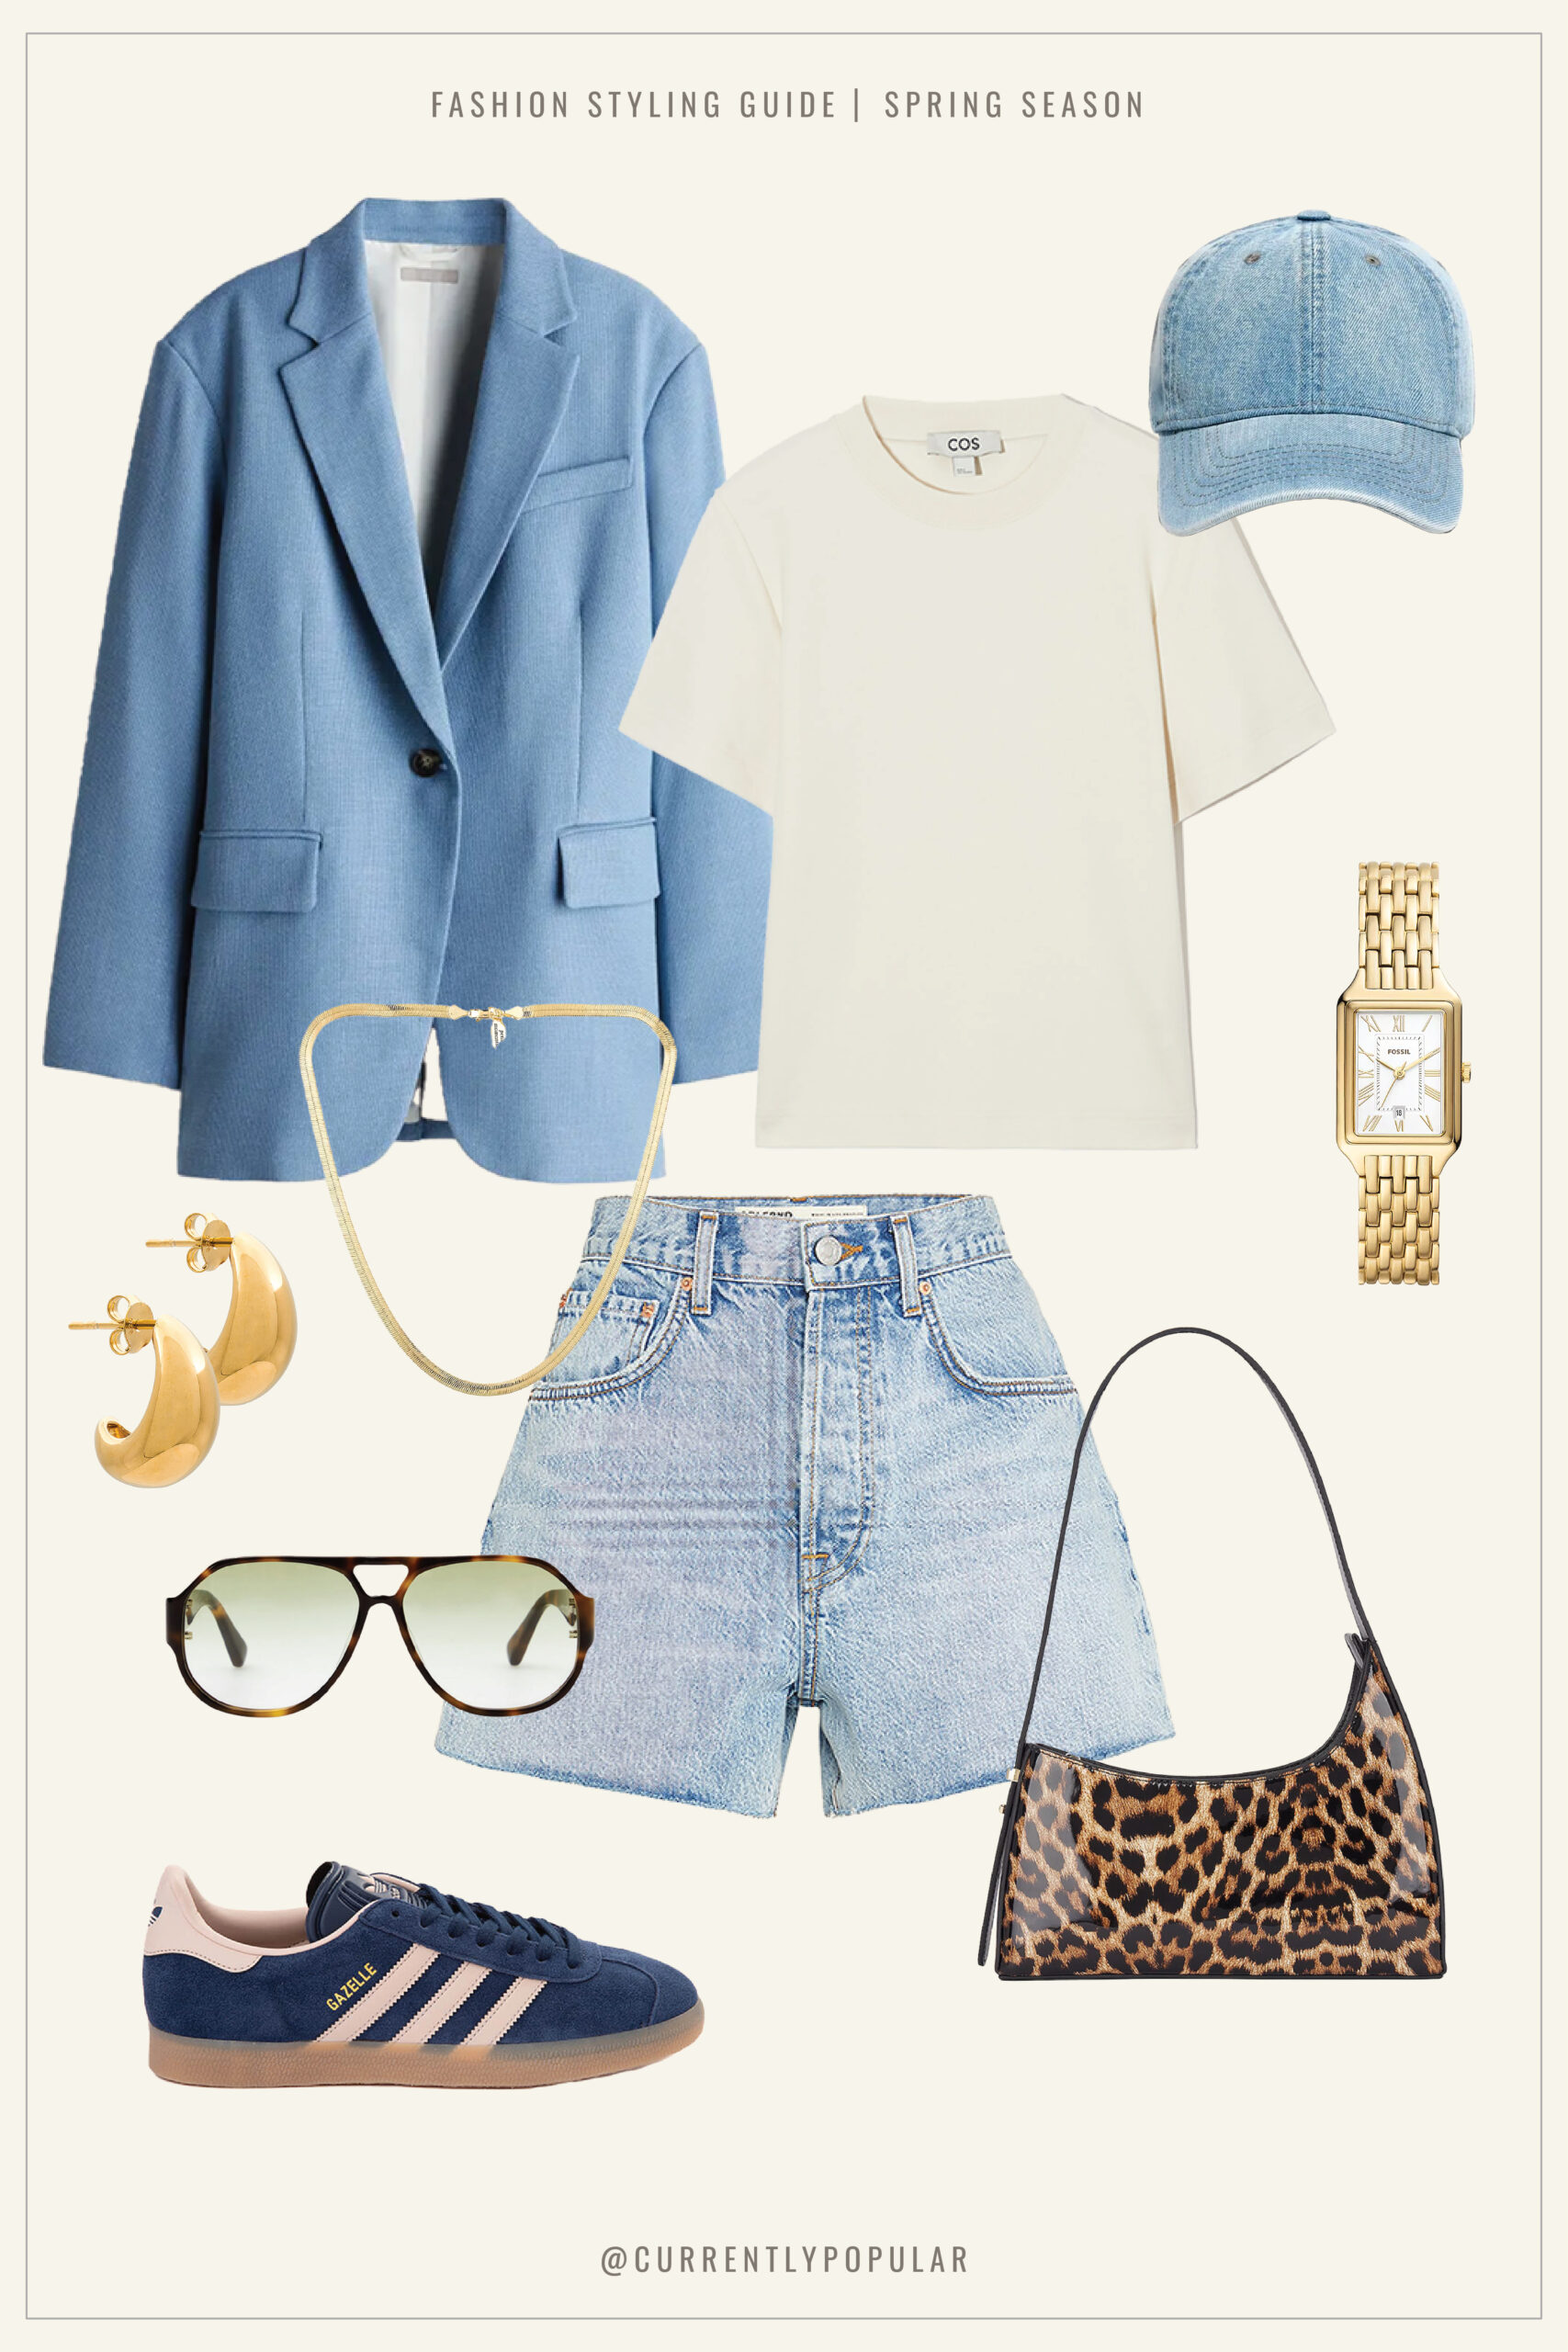 A curated spring fashion collage presenting a sophisticated yet casual style. The ensemble features a powder blue blazer paired with classic light-wash denim shorts and a relaxed ivory T-shirt. Complementing the outfit are brown rectangular sunglasses and gold chunky hoop earrings. A chic gold wristwatch adds a touch of elegance, while a blue denim baseball cap and matching suede sneakers with white stripes keep the look grounded and sporty. The look is finished with a bold leopard print handbag, infusing an edgy contrast to the soft blue tones.